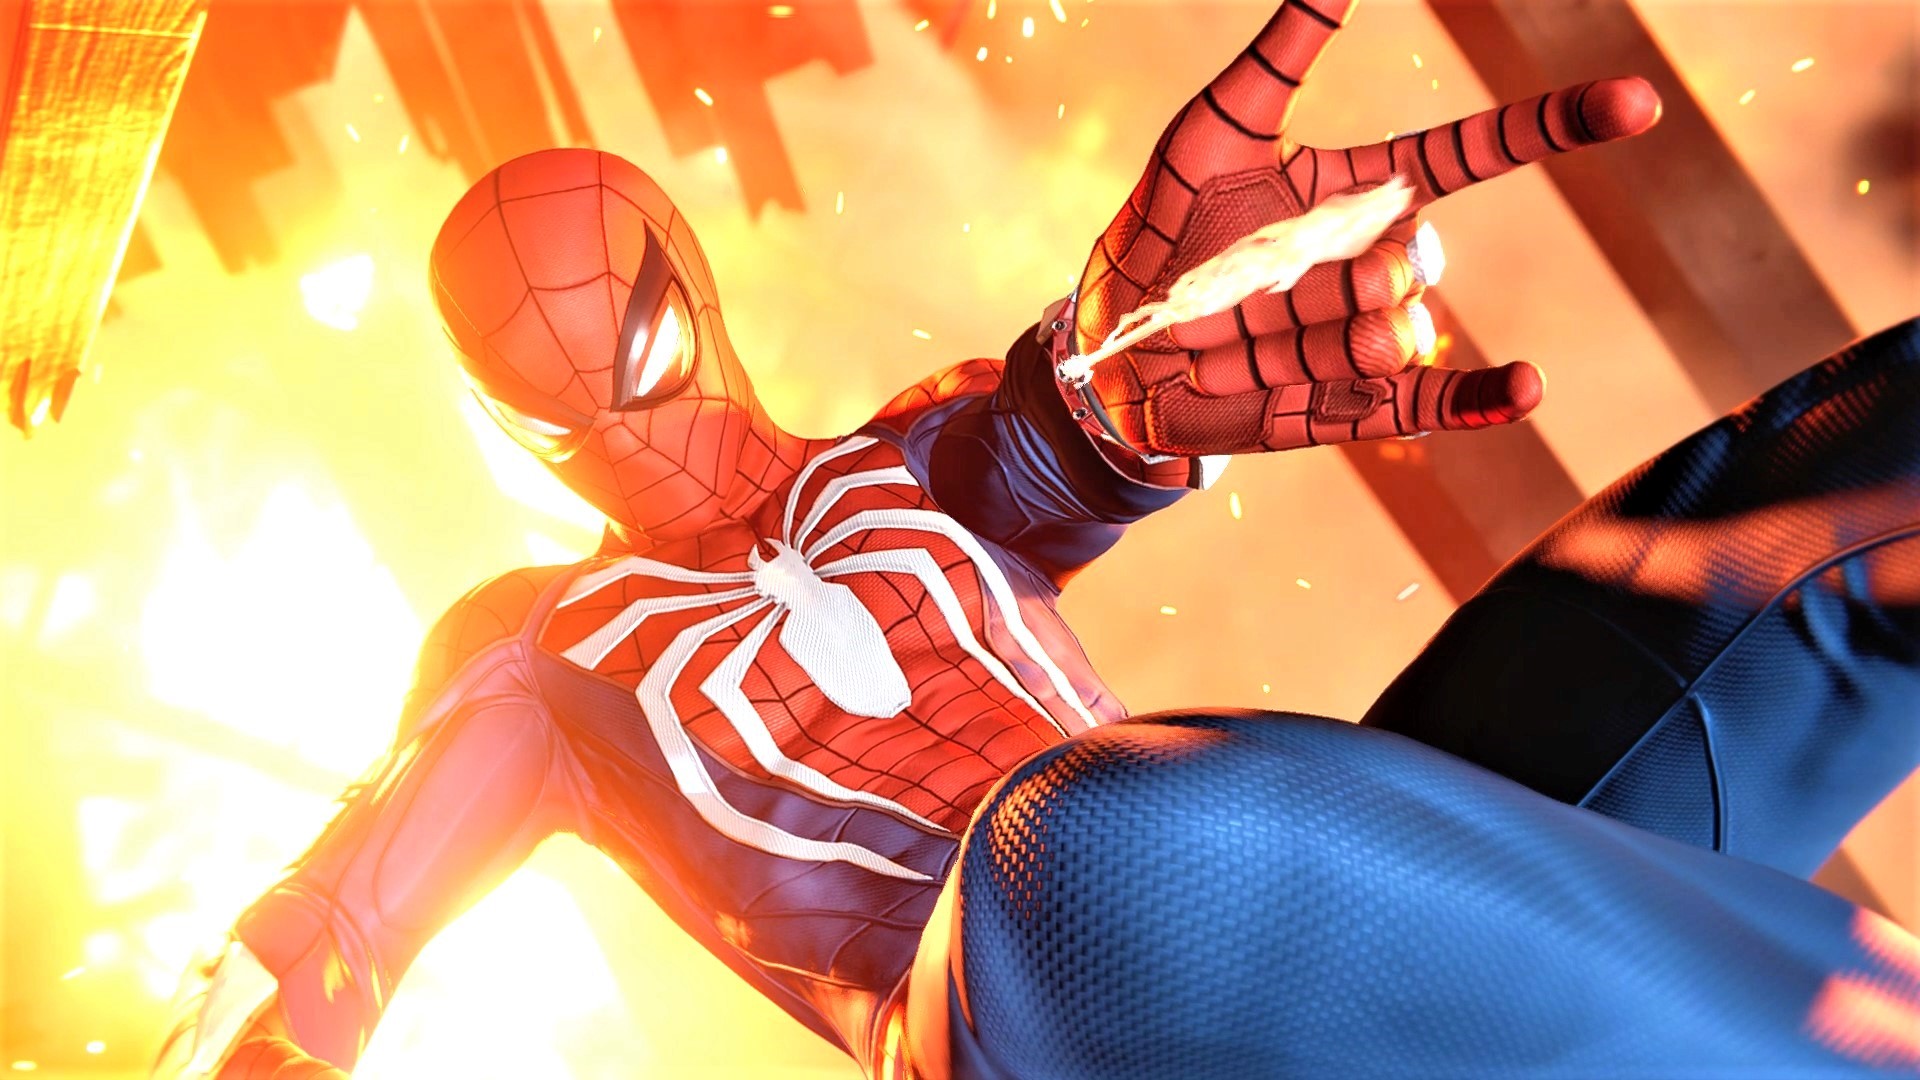 Marvel's Spider-Man Remastered (PC) vale a pena? Análise - Review